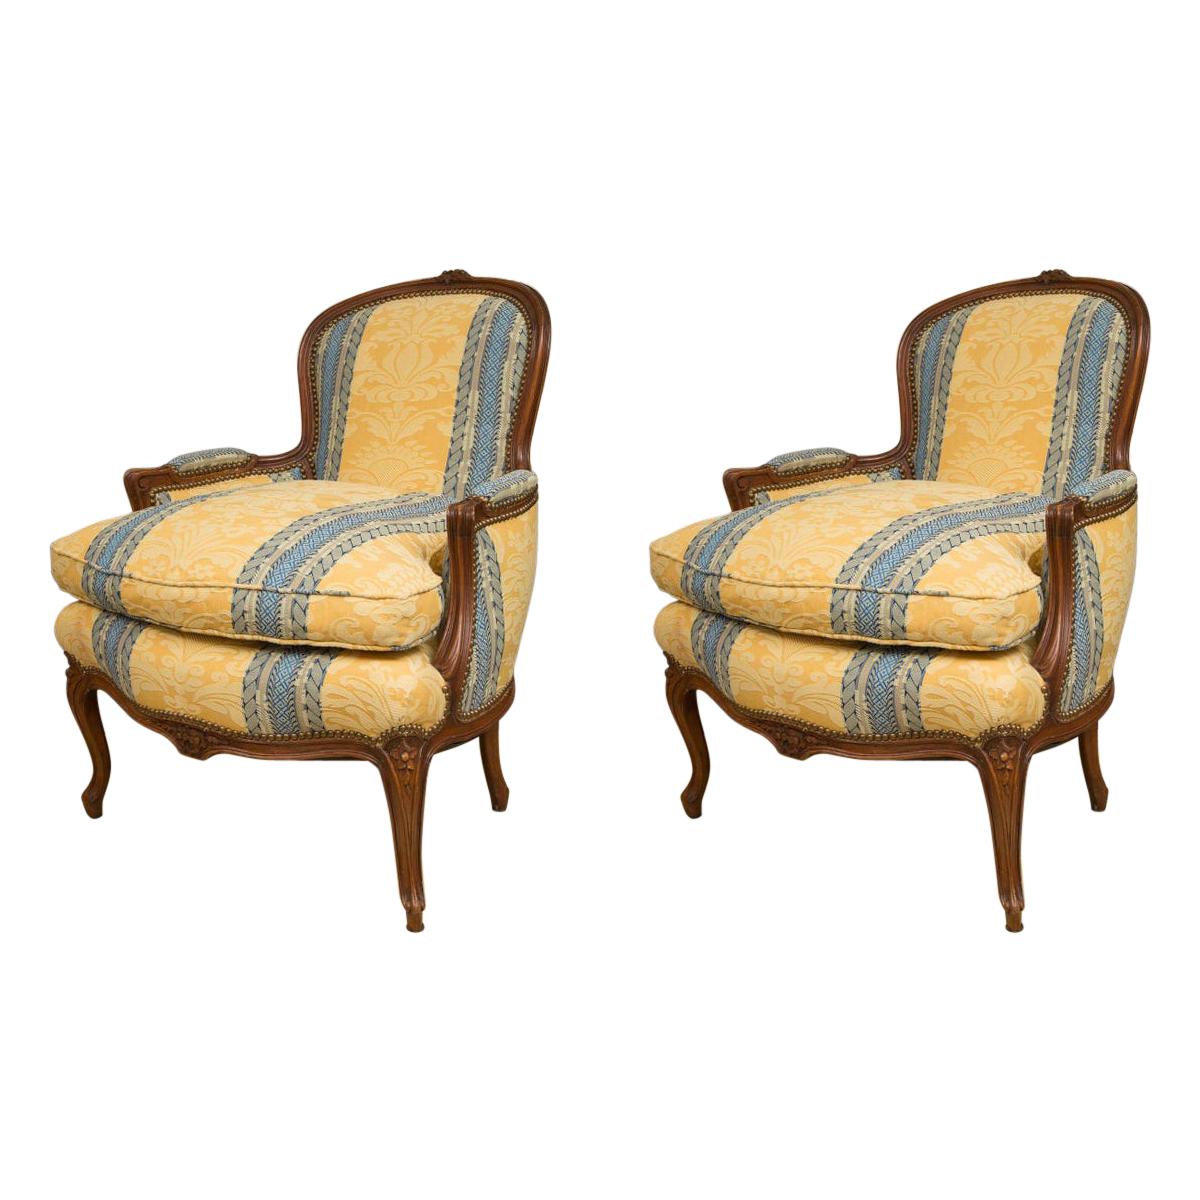 Pair of French Upholstered Bergere Chairs